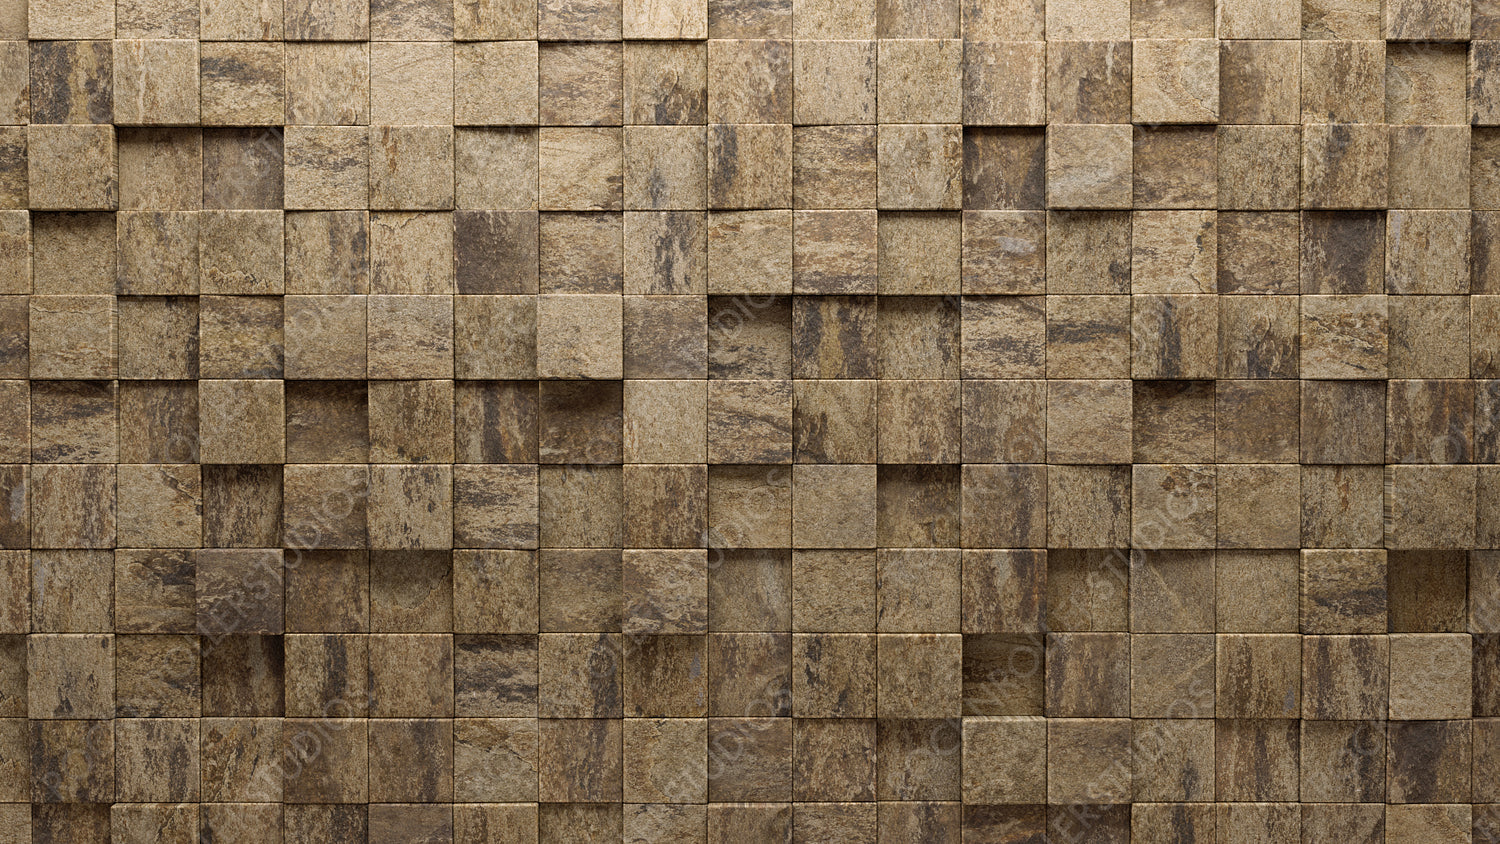 Textured Tiles arranged to create a Semigloss wall. 3D, Natural Stone Background formed from Square blocks. 3D Render